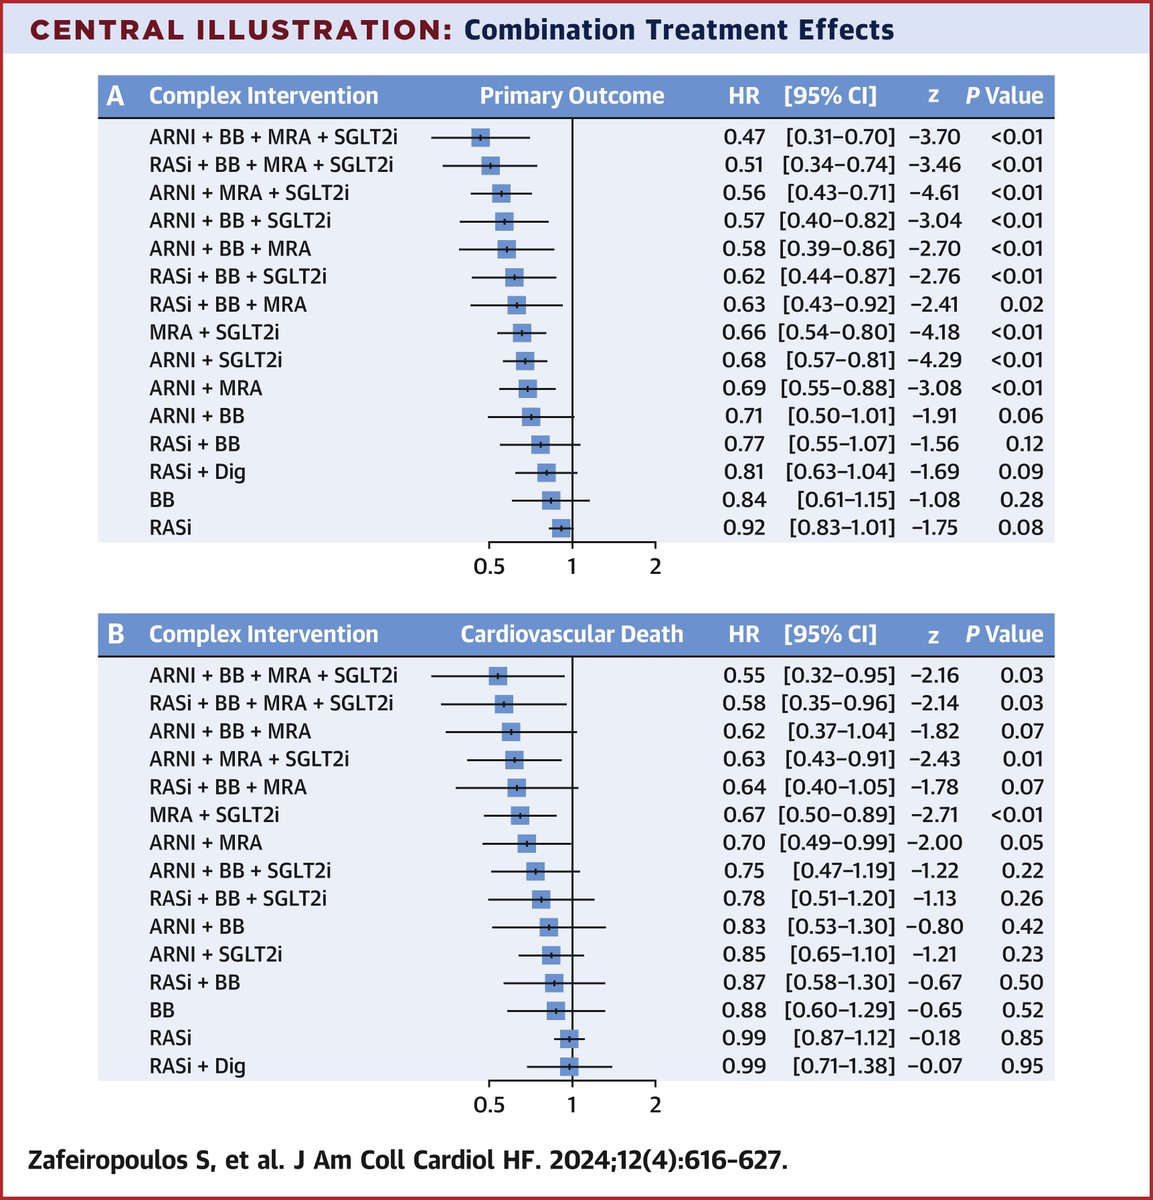 Quadruple therapy w/ #ARNI, BB, MRA, #SGLT2i led to decreased risk of CV death & HHF in pts w/ #HFmrEF & #HFpEF. This benefit is largely driven by ARNI, MRA, SGLT2i, which was more pronounced in HFmrEF. bit.ly/3UtIEOD #JACCHF #GDMT #CHF @Cardiaficionado @GGiannakoulas